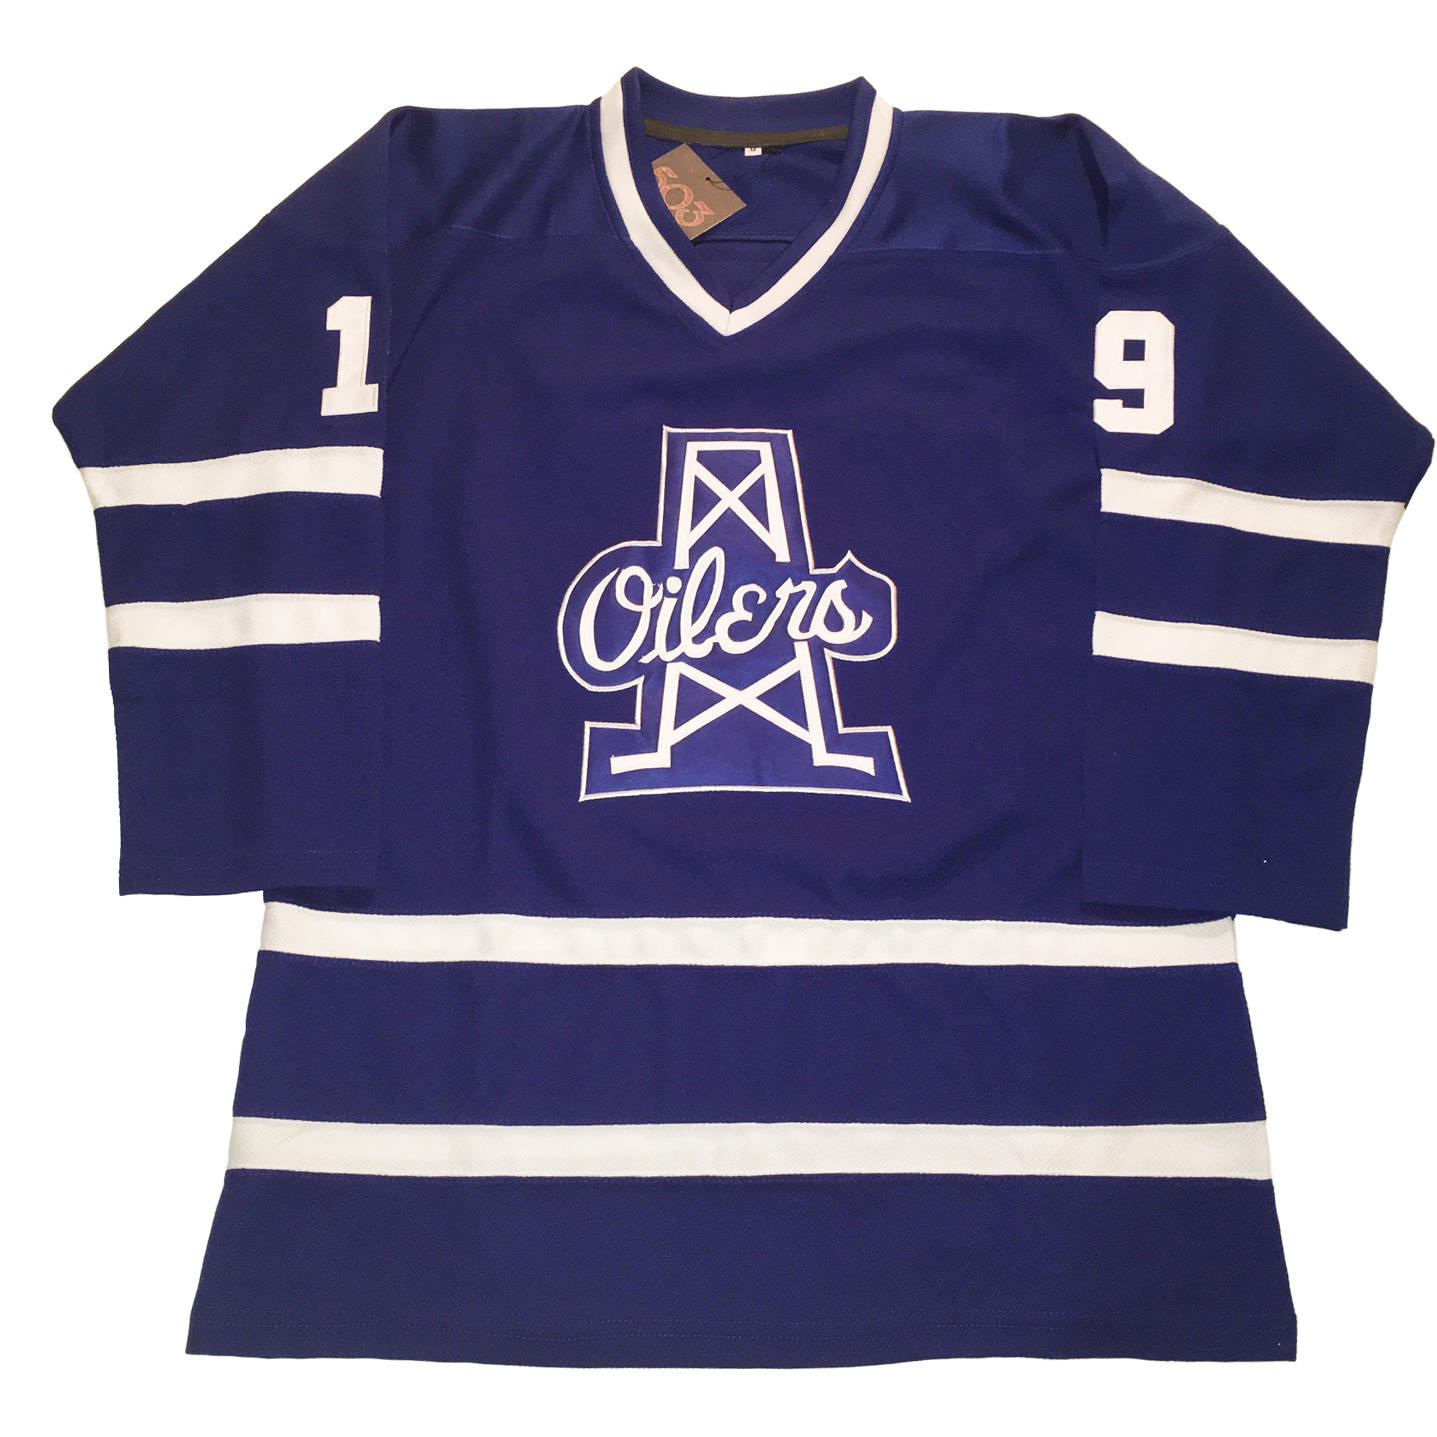 Tulsa Oilers on X: Reverse Retro Jersey Auction! 🔥BID NOW🔥   Get your bids in for these one-of-a-kind jerseys. ⚡  #23 Murray ⚡ #77 Golod ⚡ #92 Badini ⚡ #91 Kindopp #hockey #